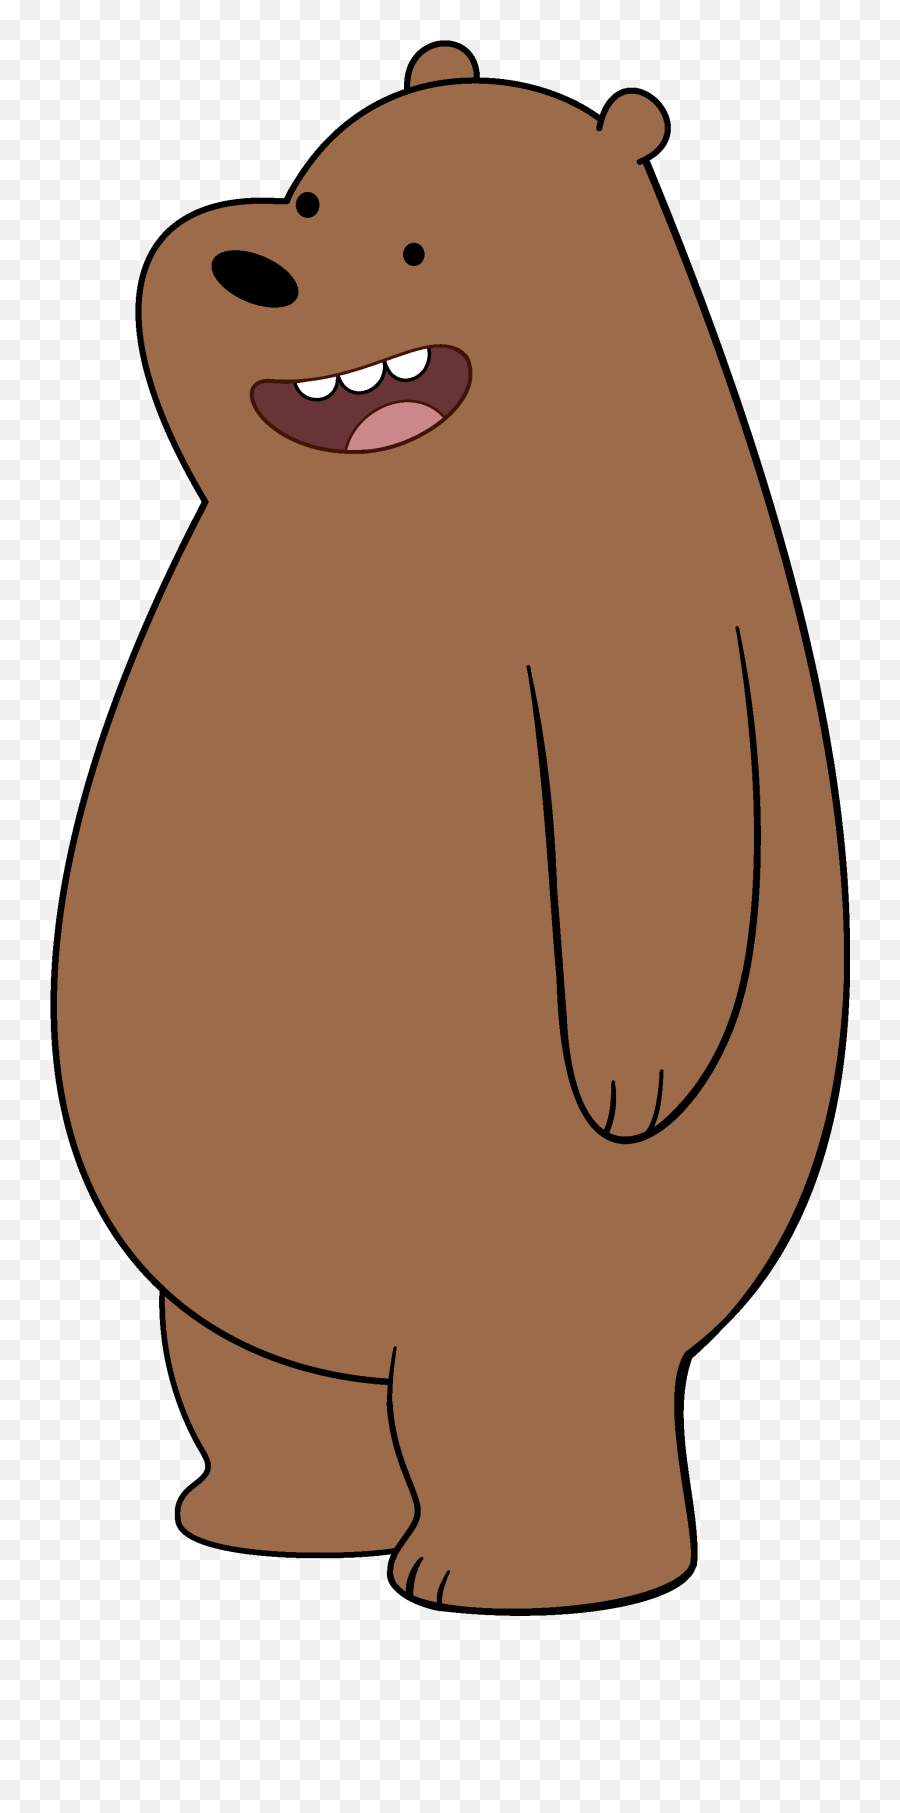 We Bear Bears Grizzly Png Image With No Emoji,Grizzly Bear Clipart